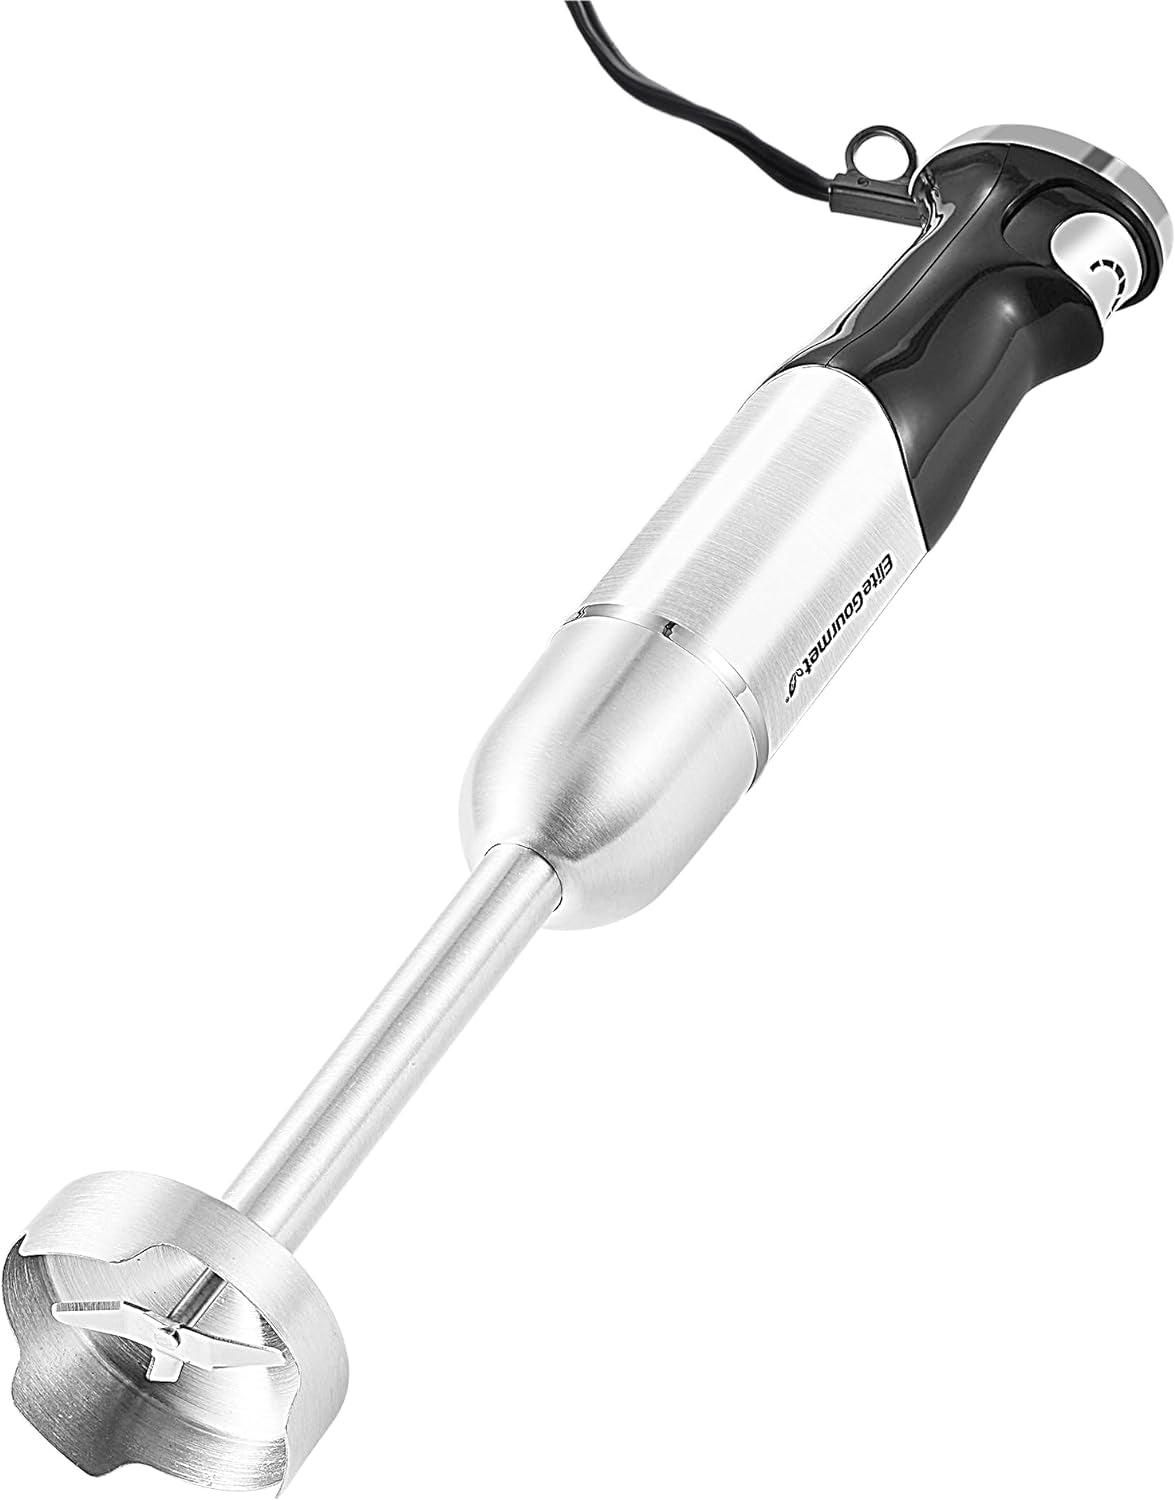 Elite Gourmet EHB1023 Immersion Hand Blender 300 Watts 2 Speed Mixing with Detachable Blades, Detachable Wand Stick Mixer, Smoothies, Baby Food, Soup, Black  Elite Gourmet Stainless Steel  Black Immersion Blenders 500 Watts